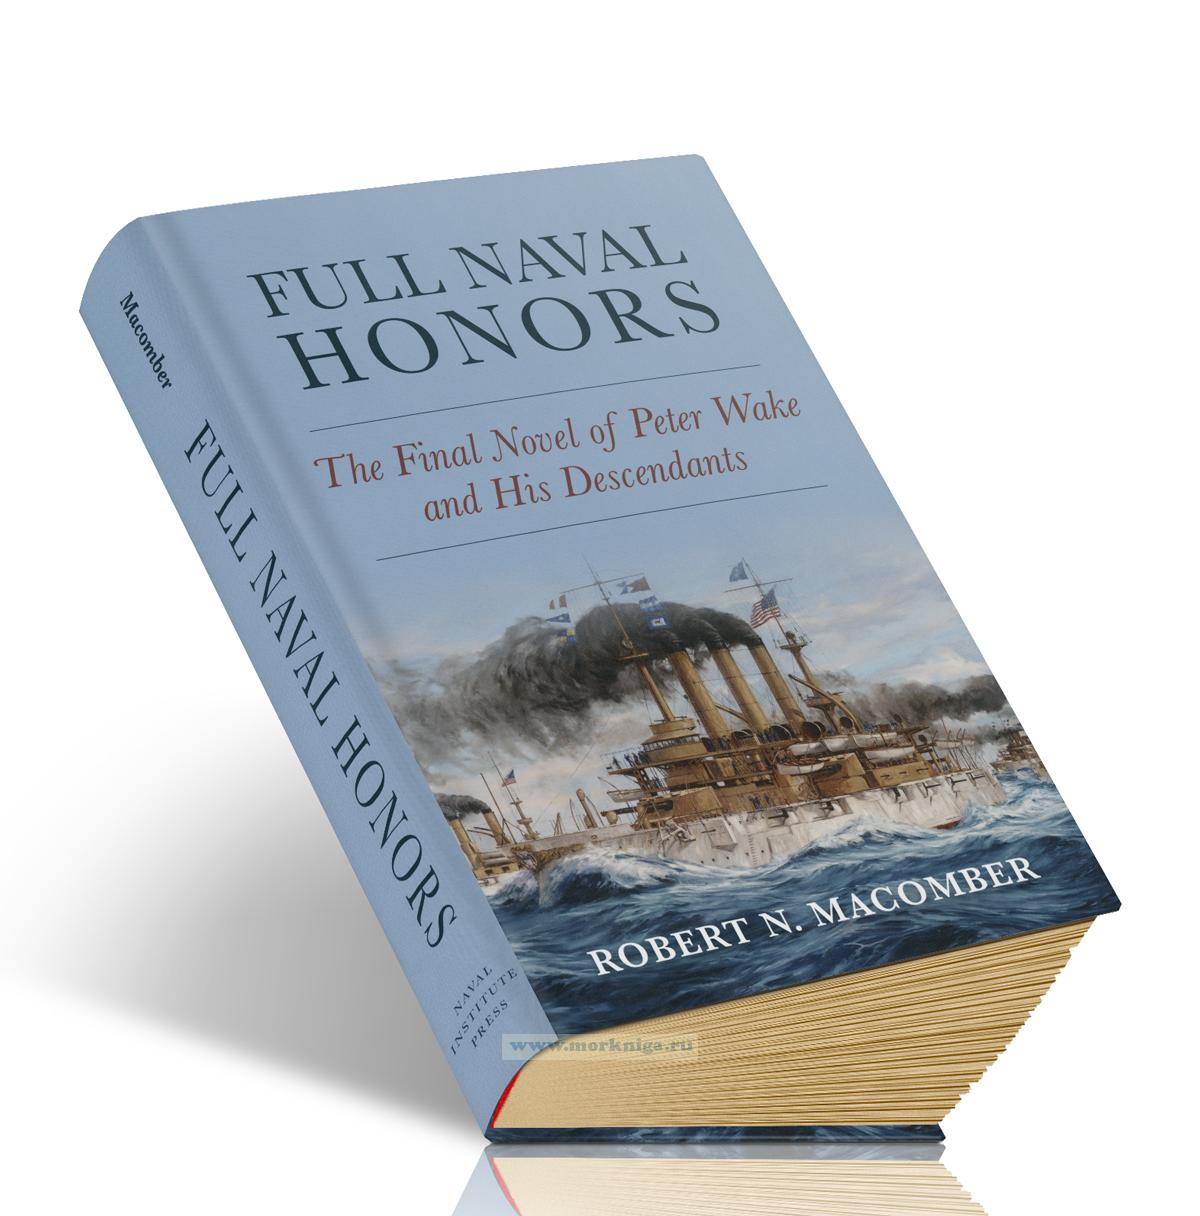 Full Naval Honors. The Final Novel of Peter Wake and His Descendants